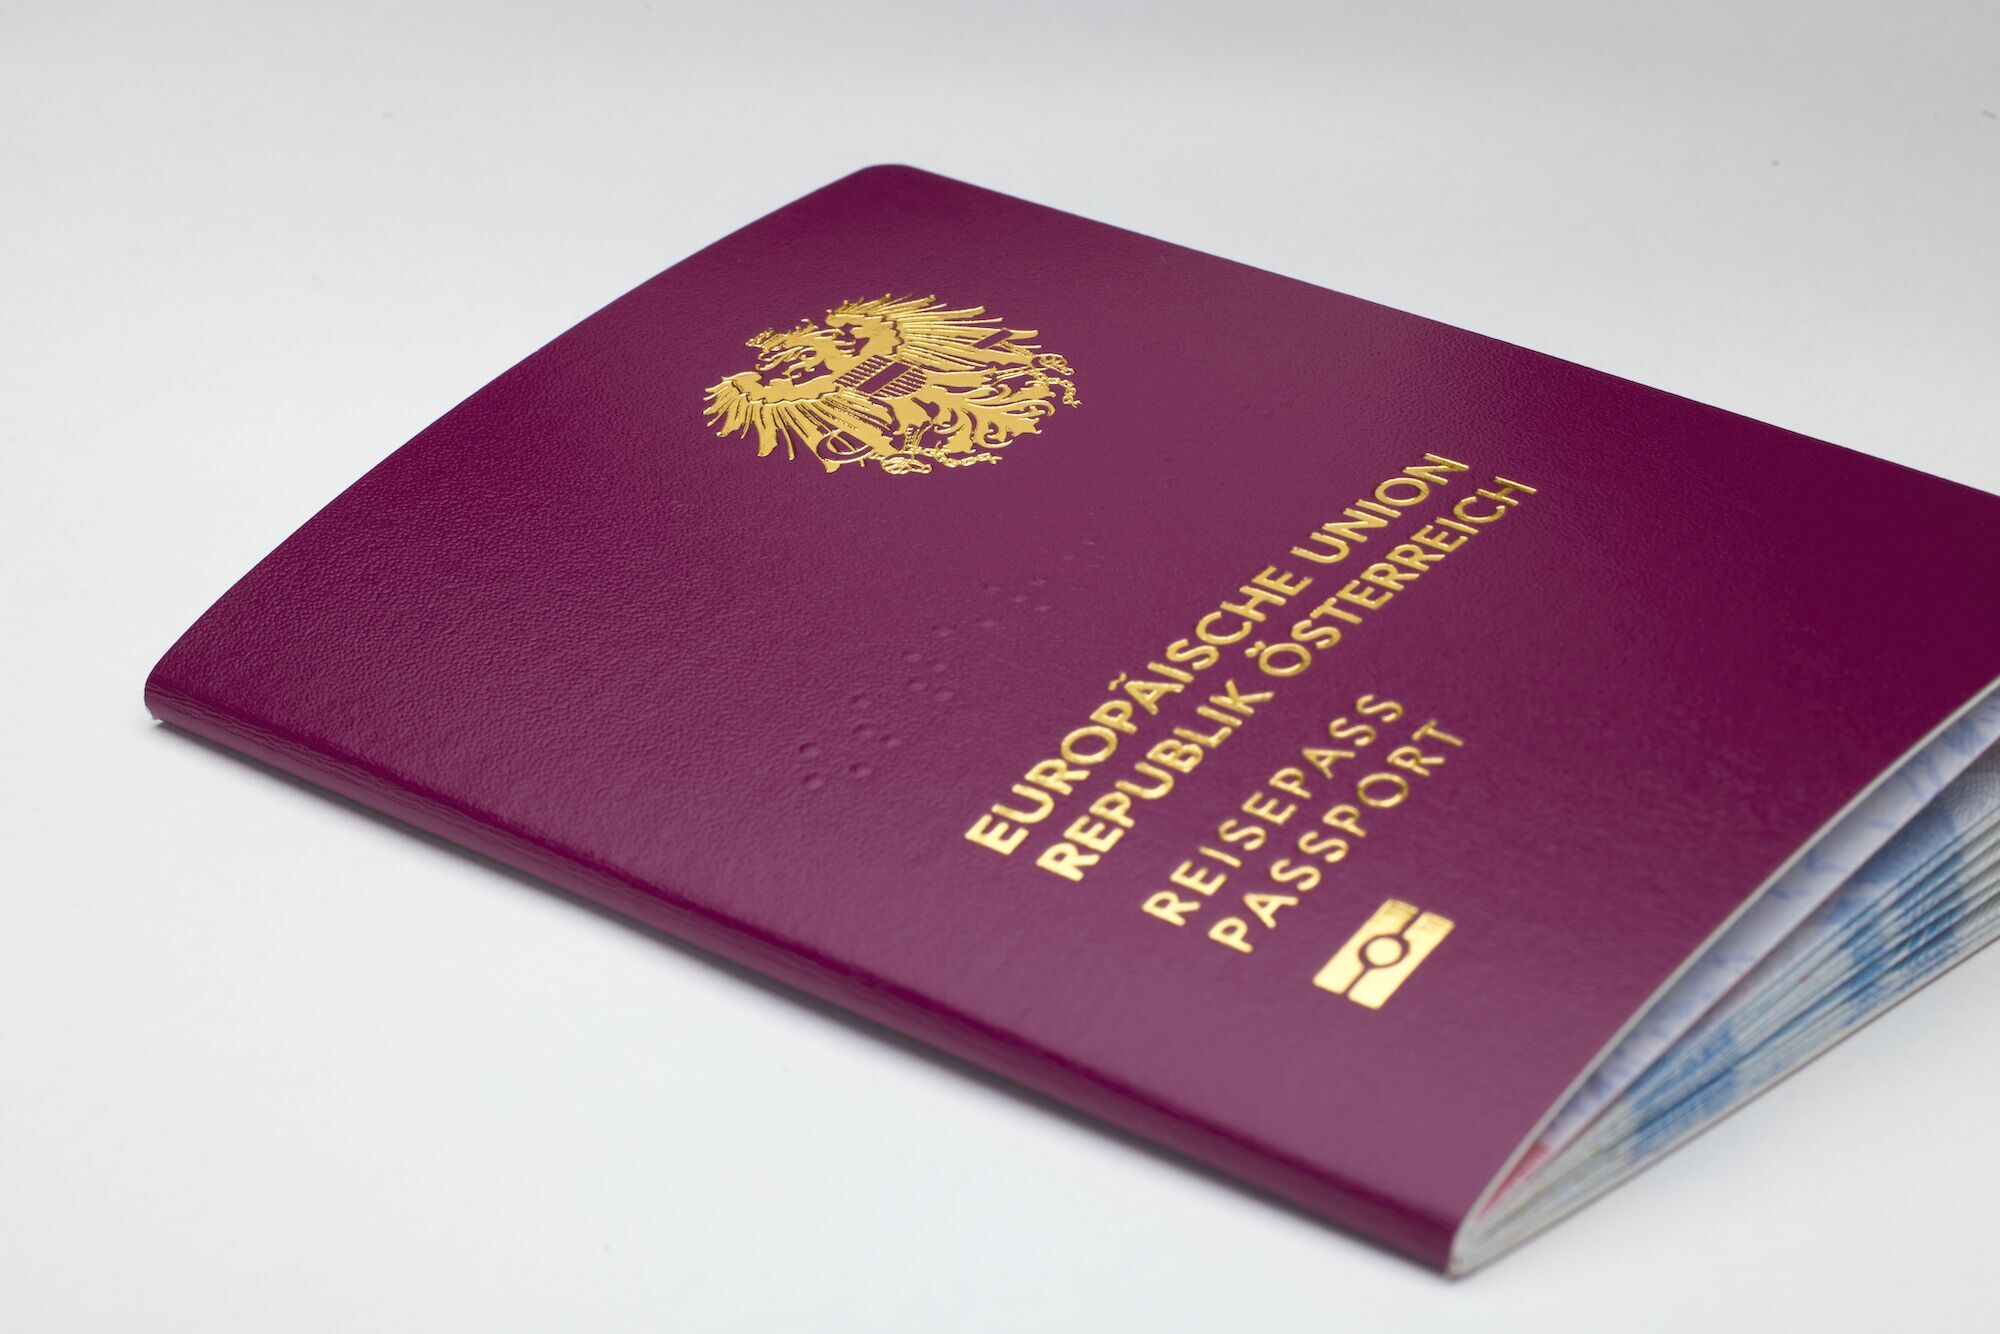 Austrian New Passport with cover